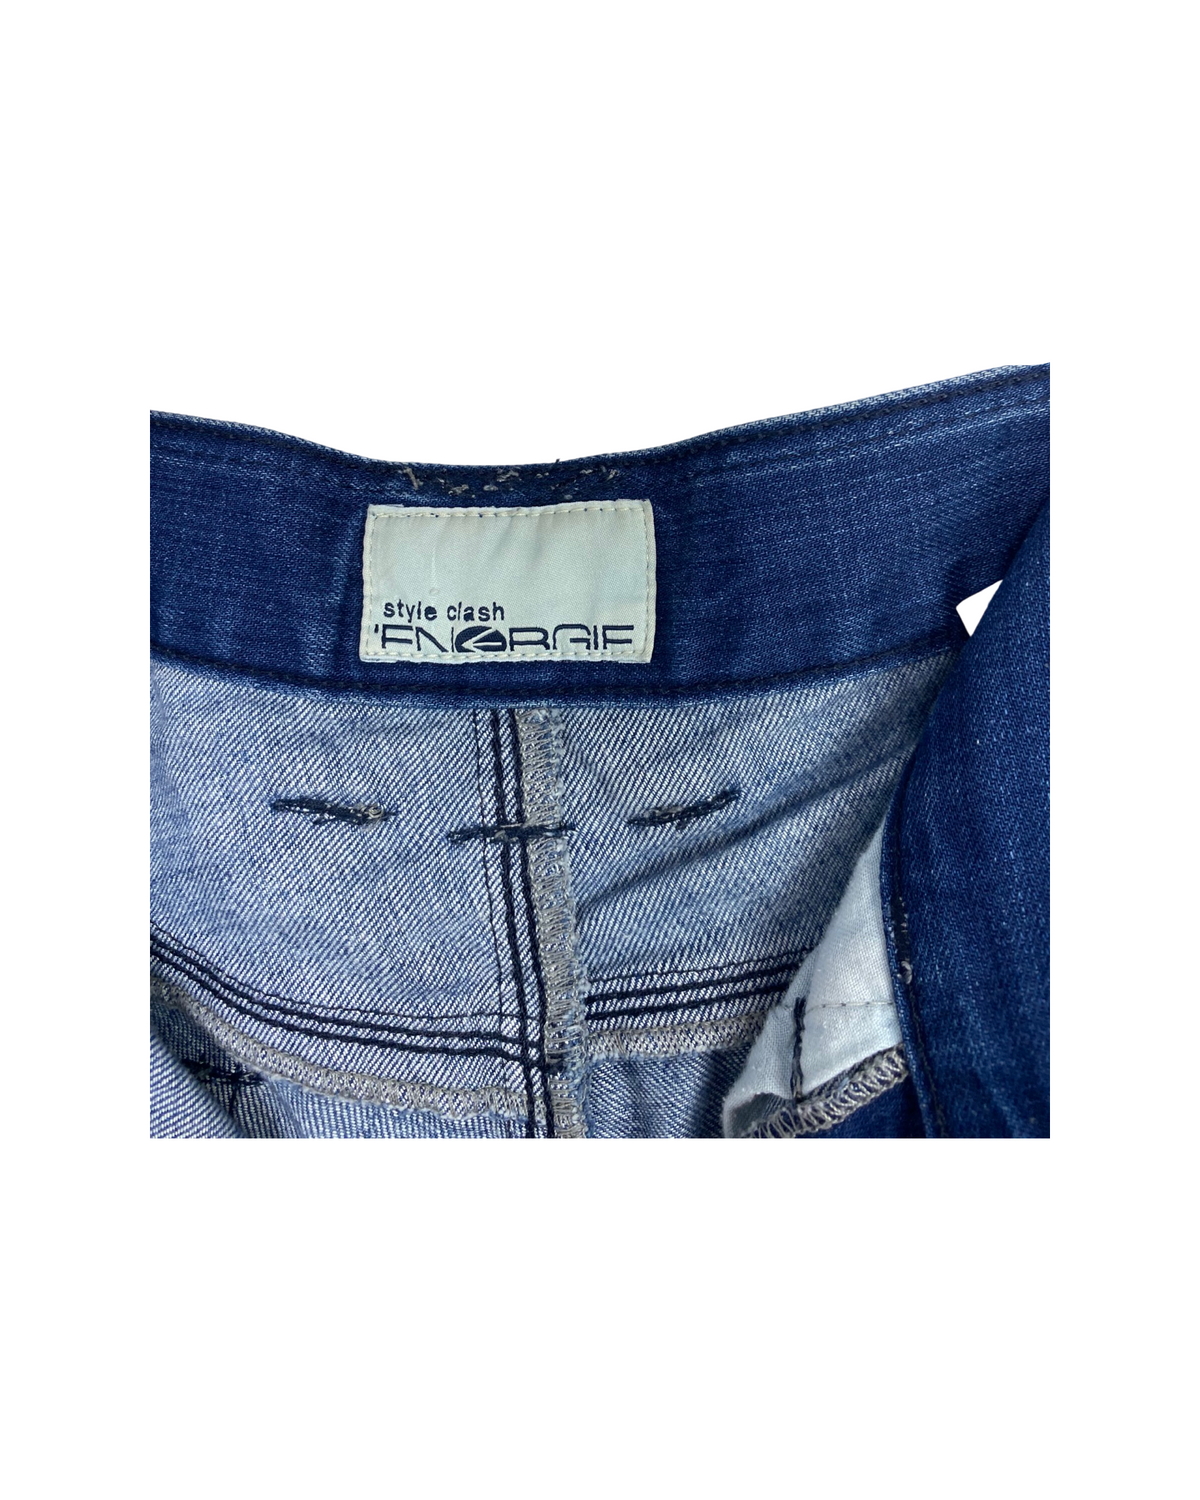 Energie Straight Baggy Jeans, W34 L34 - Don't Swap!